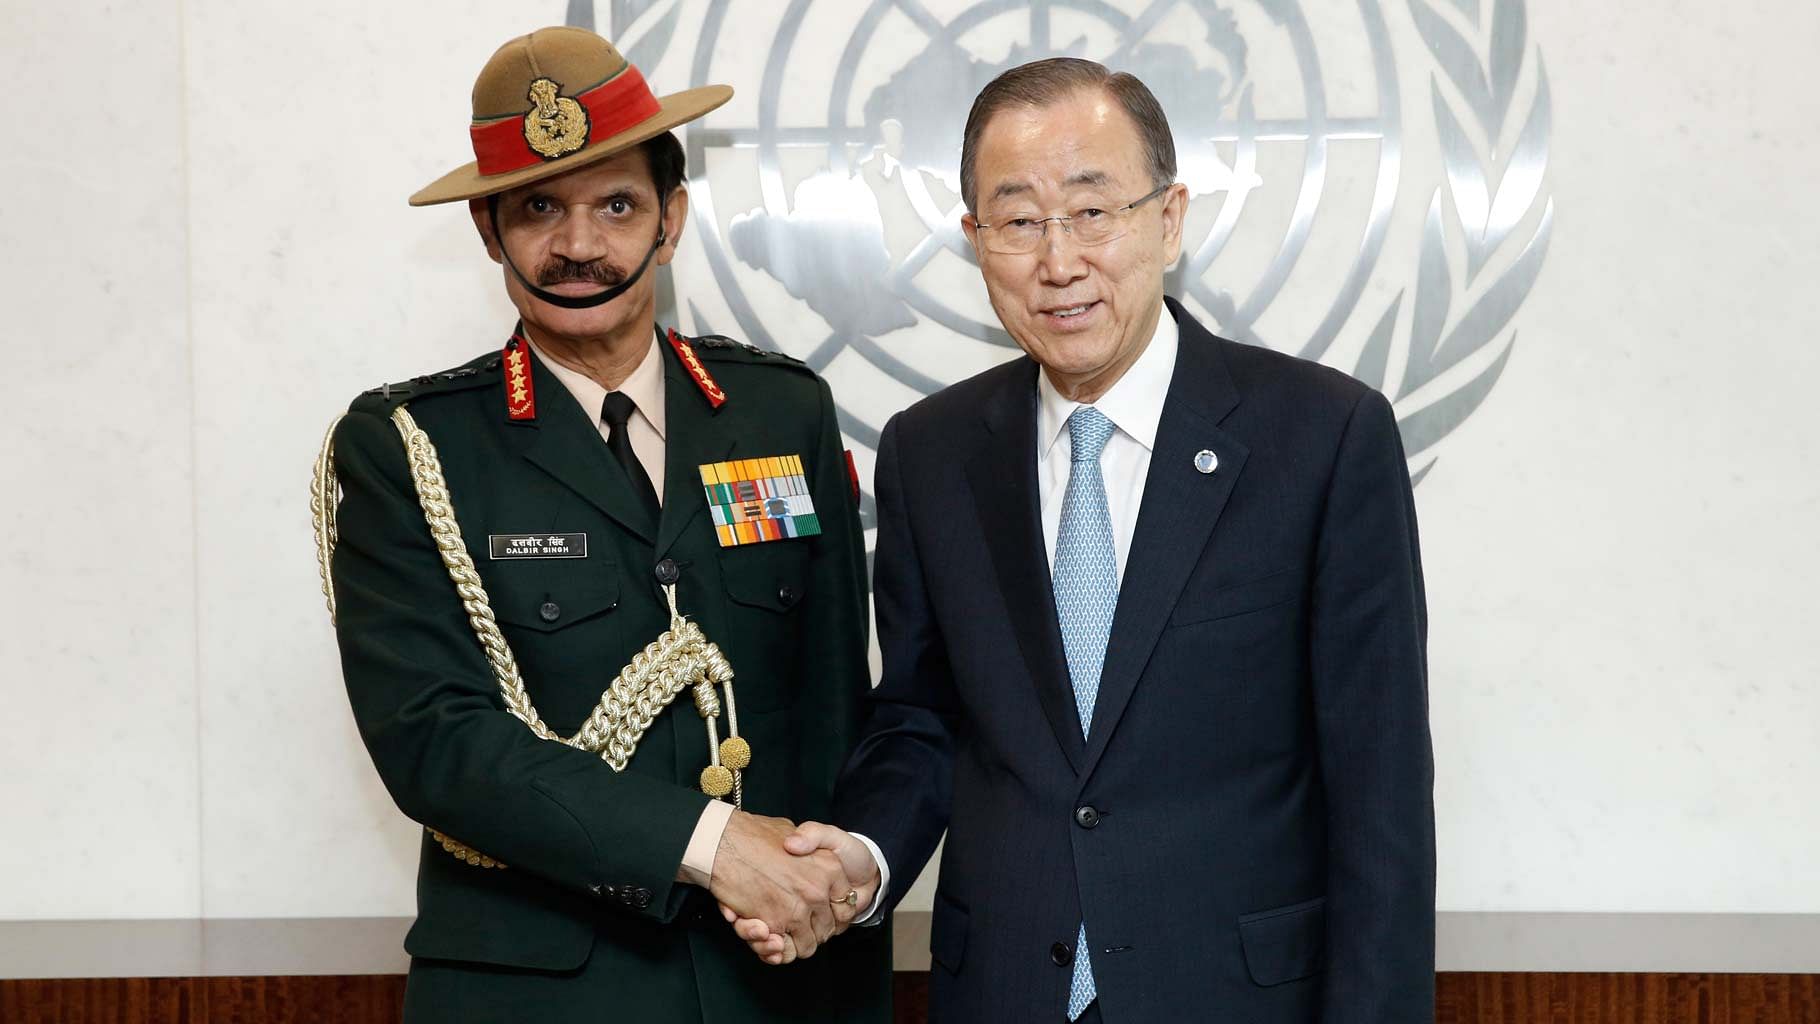 United Nations Secretary General Ban Ki-moon met General Dalbir Singh, the Indian Chief of Army Staff, Monday, April 4, 2016, at the UN headquarters in New York. &nbsp;